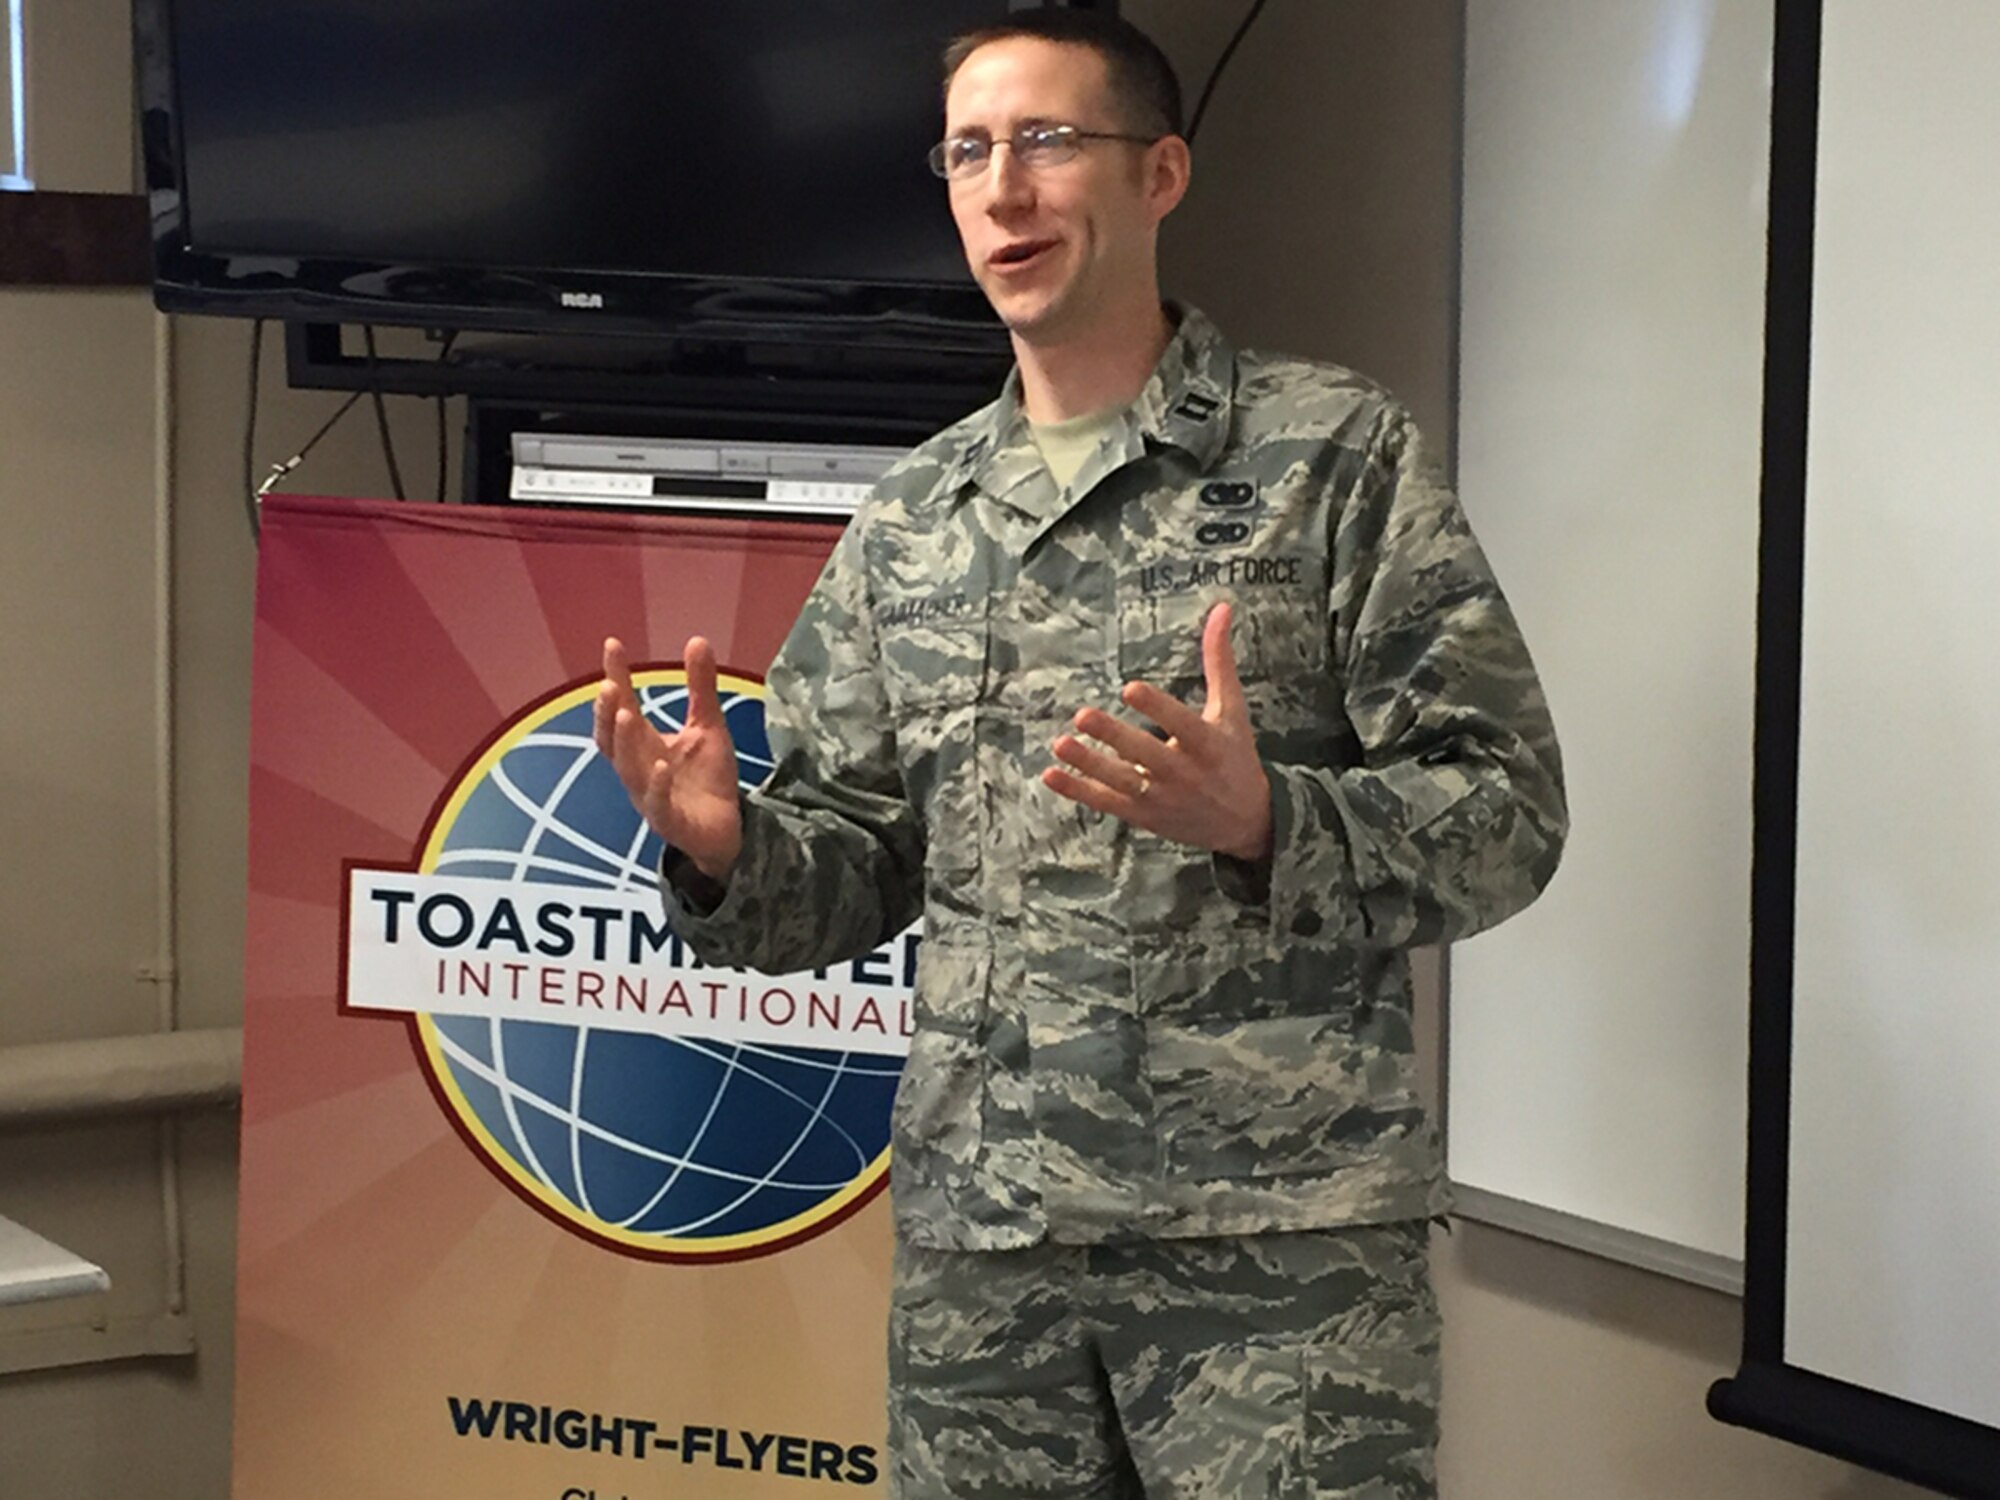 Capt. Michael Schumacher, course director in the School of Systems and Logistics, Air Force Institute of Technology, became a Toastmasters club member two months ago. He said his speech skills already have improved. (Skywrighter photo/Amy Rollins)